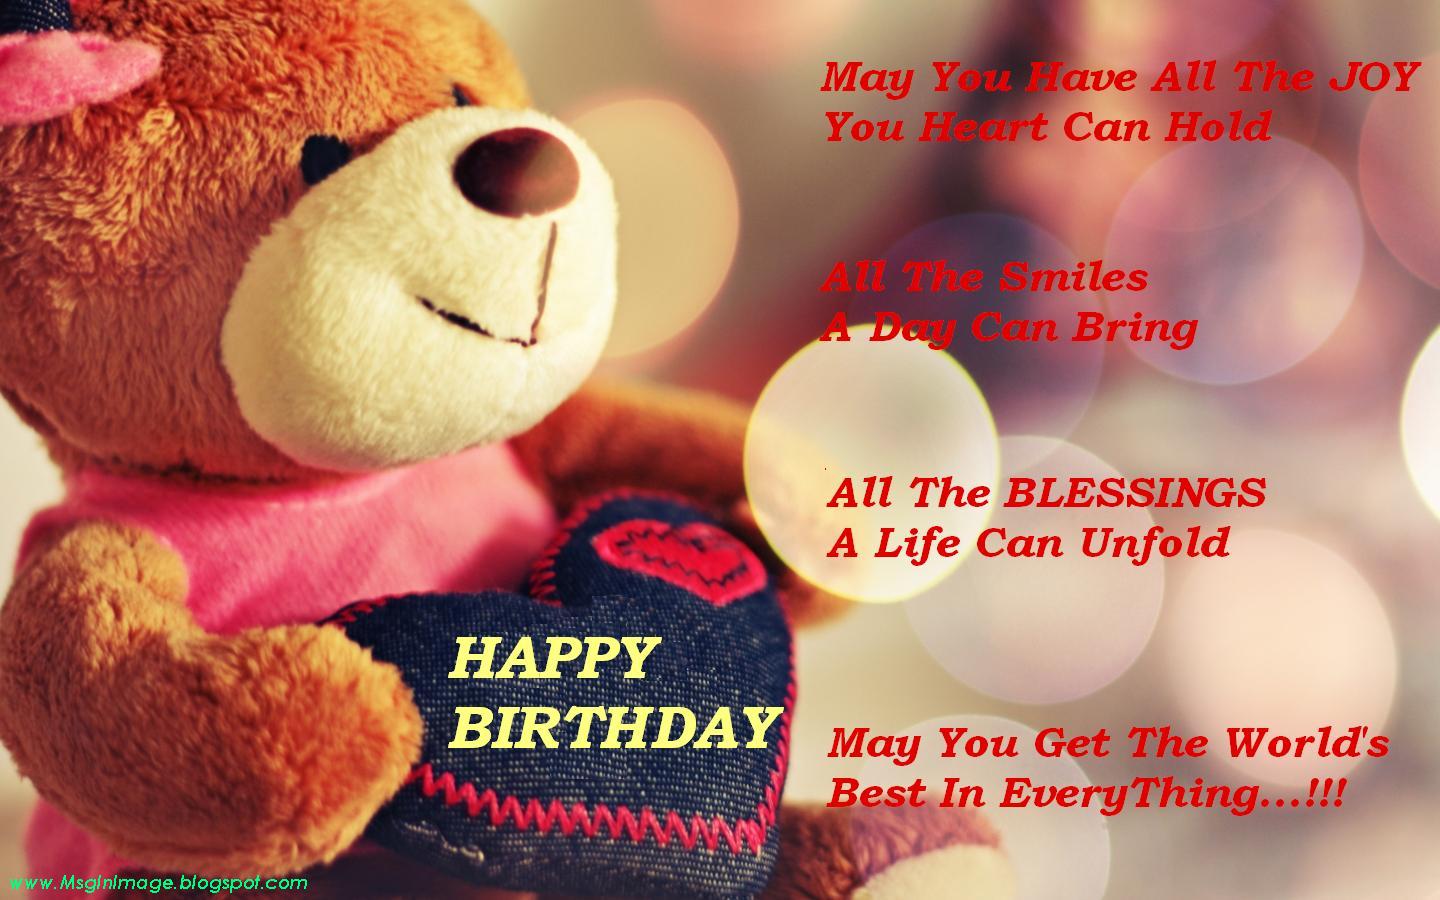 Happy birthday to you,sweetie !! - published by EternalLightStream on